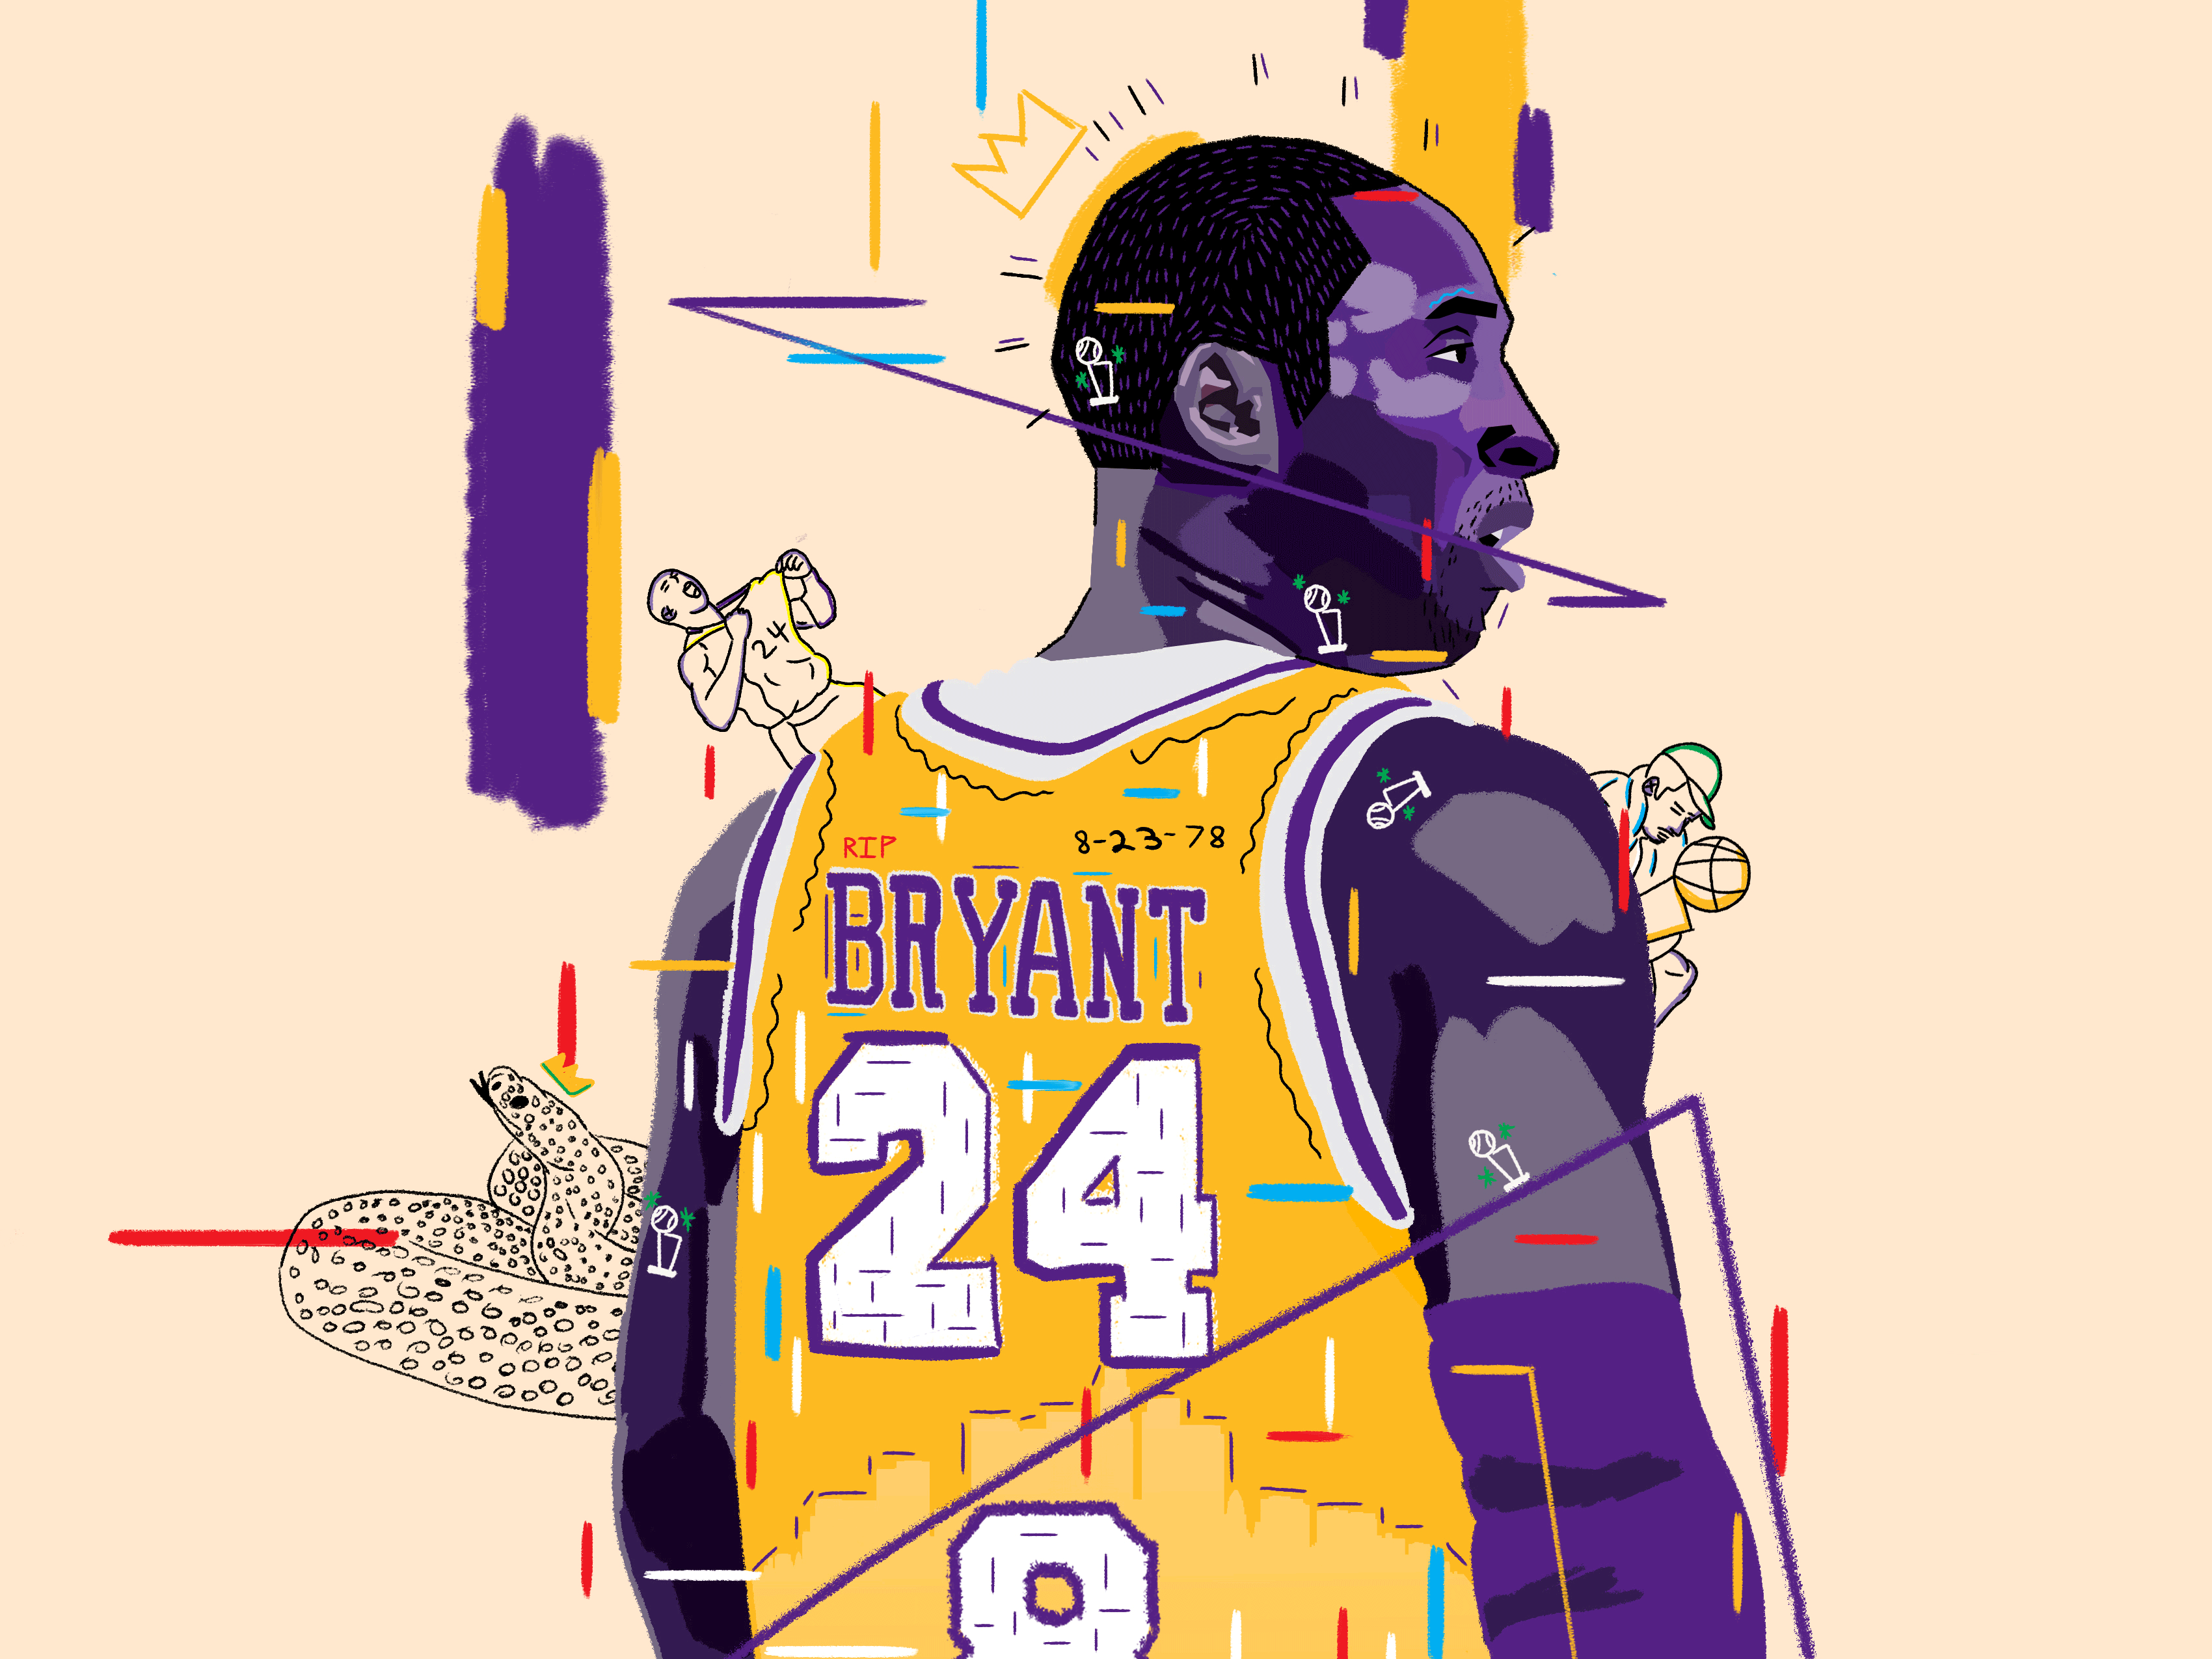 Kobe Bryant left Los Angeles with memories, championships and a Mamba legacy